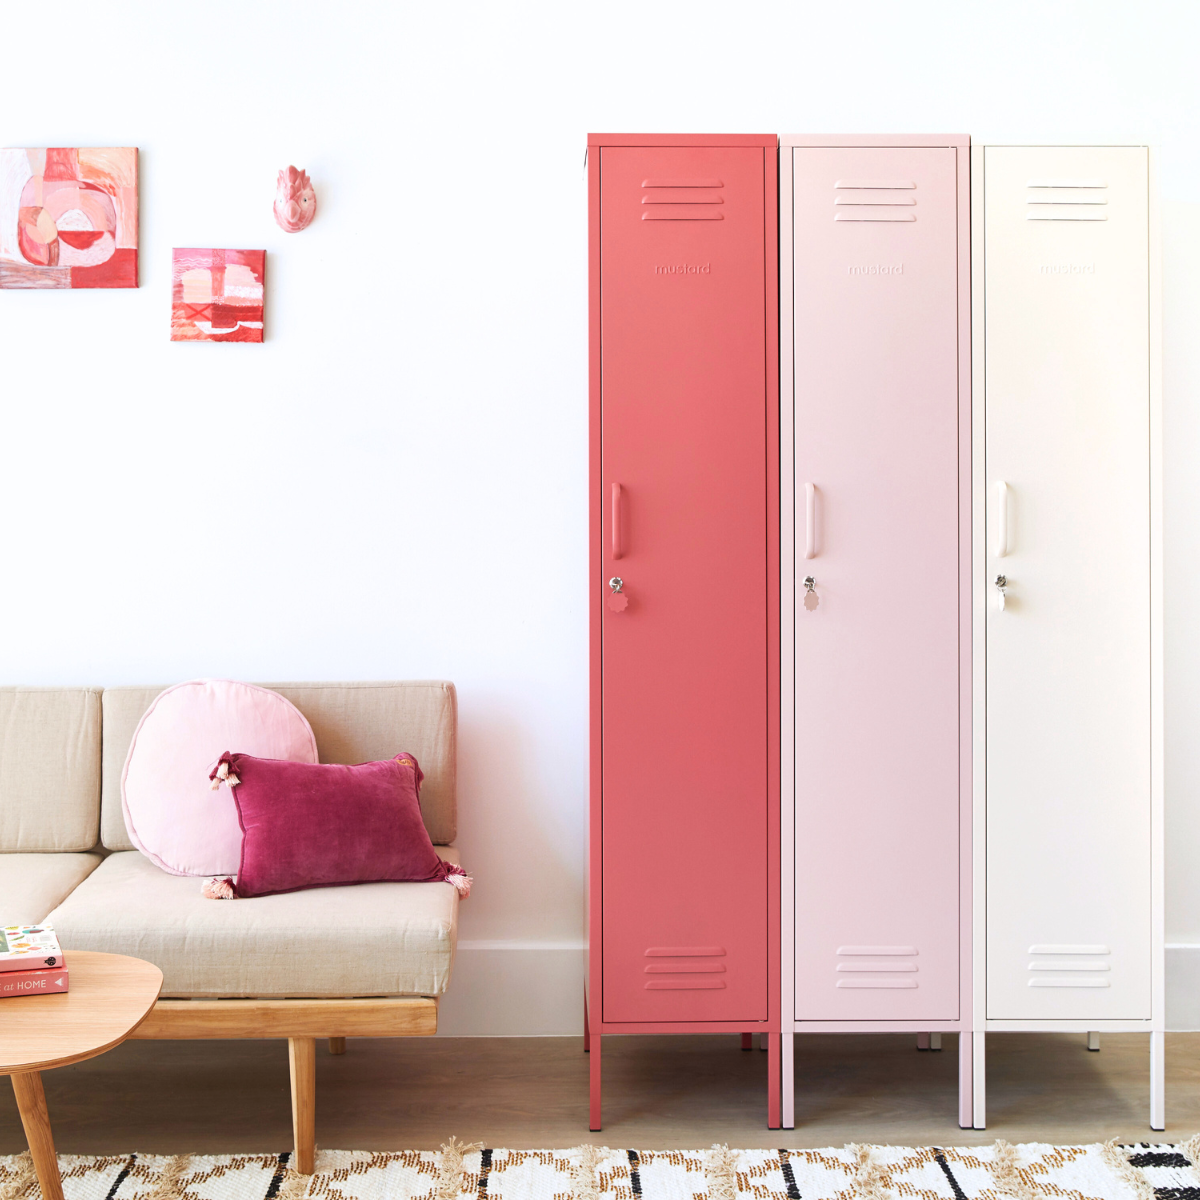 Three Mustard Made Skinny lockers stand side by side. Each is a different colour. From the left it is White, Blush and then Berry. To the left of the lockers, two pink-toned artworks hang on the wall. There is also a sofa with a timber frame, beige padding and two pink cushions sitting on top. 